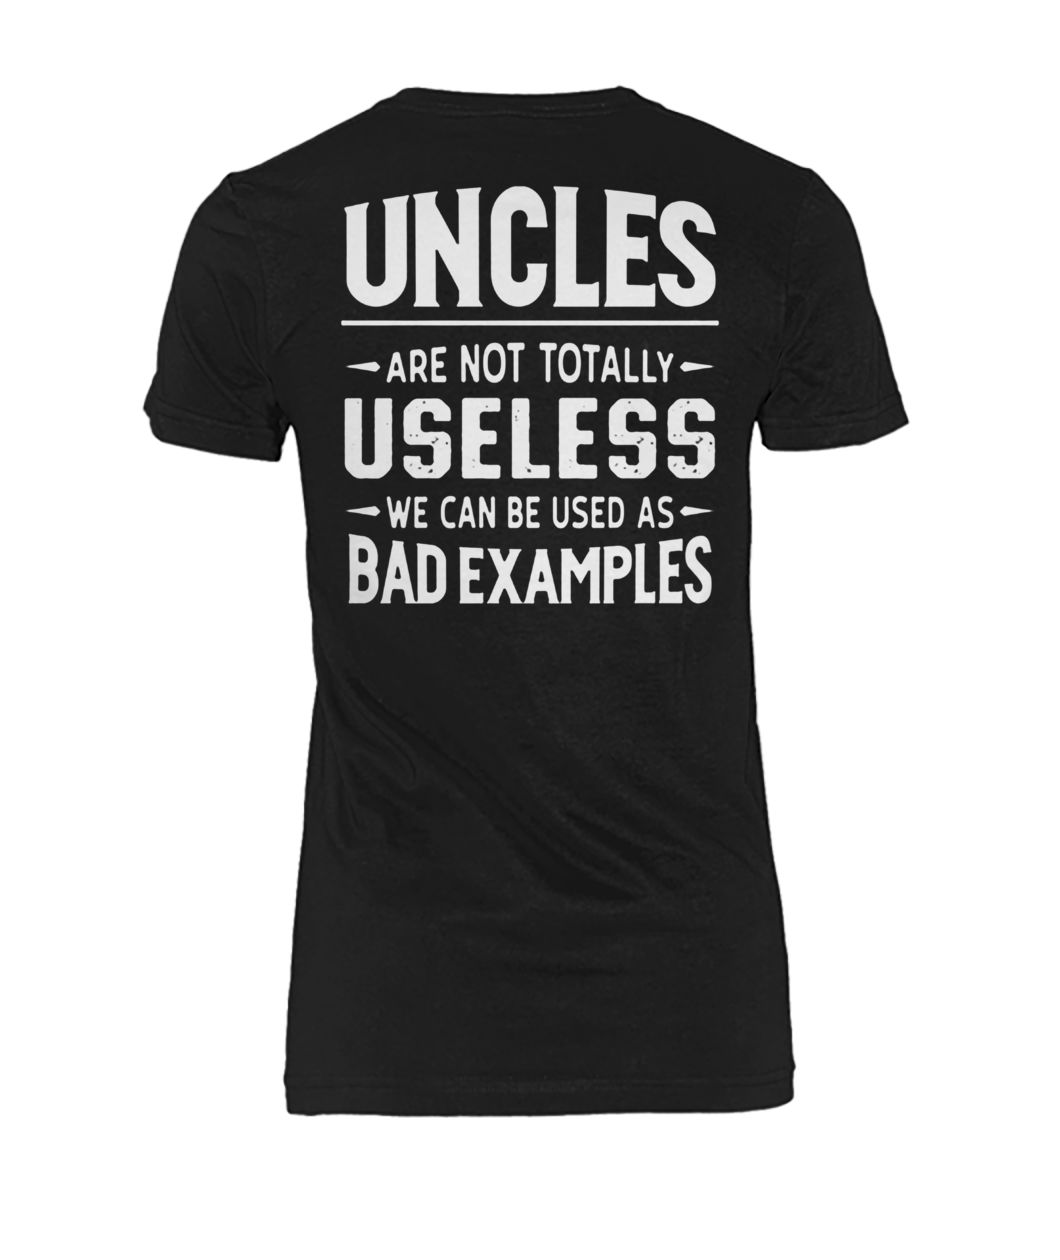 Uncles are not totally useless we can be used as bad examples women's crew tee